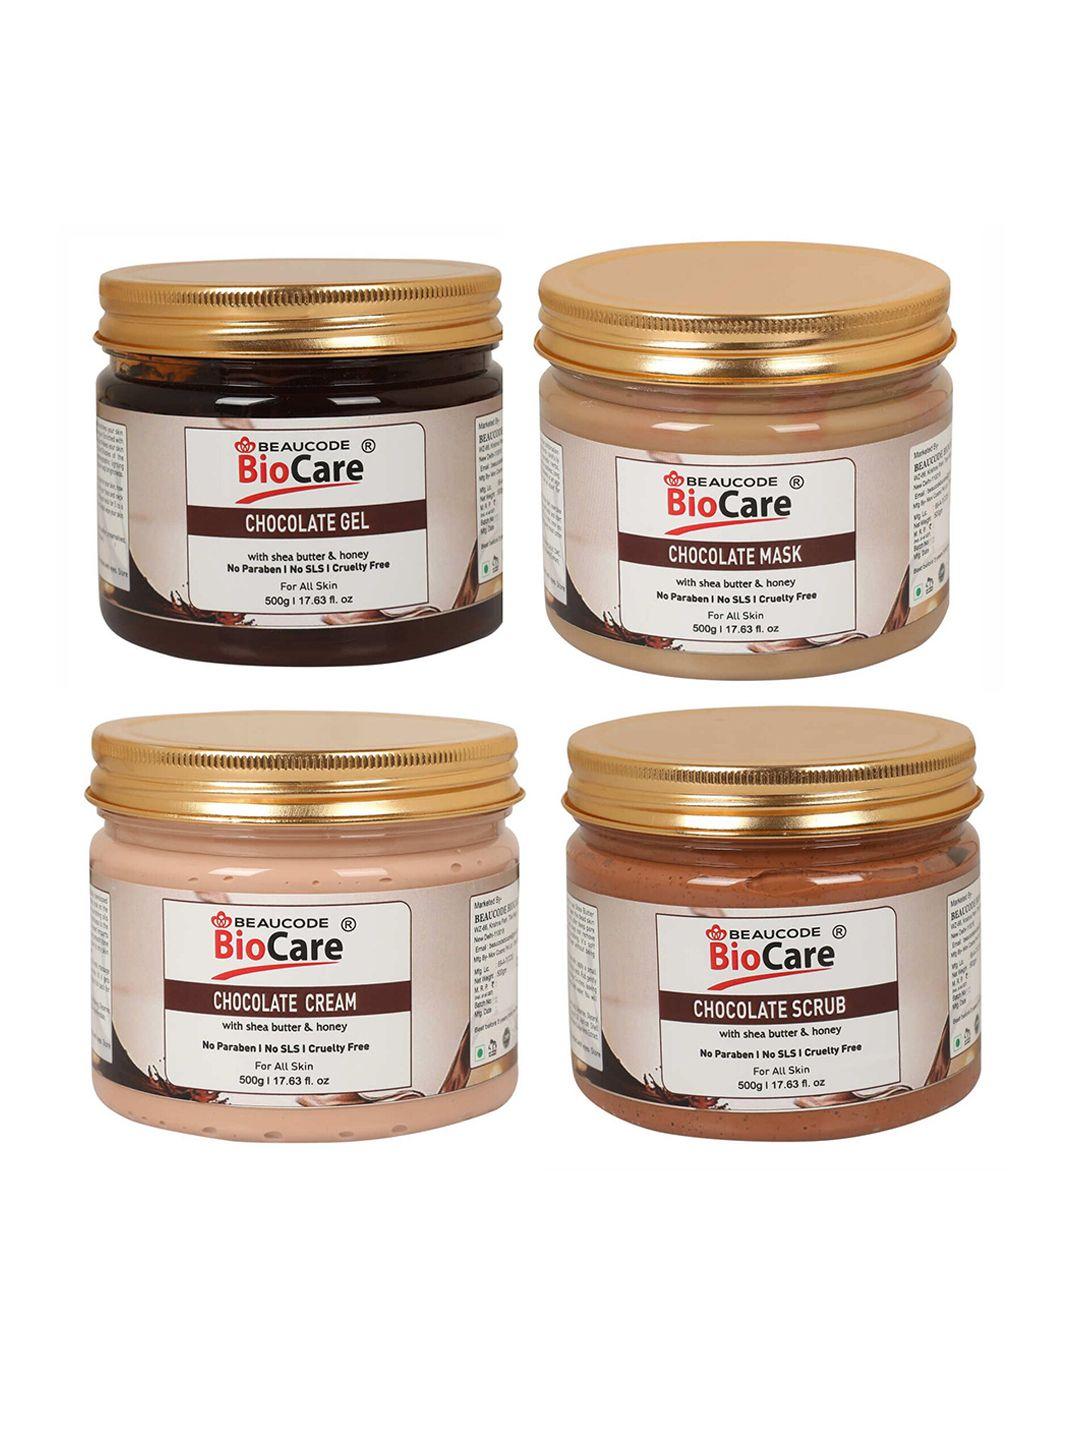 beaucode biocare chocolate facial kit with shea butter & honey -500g each